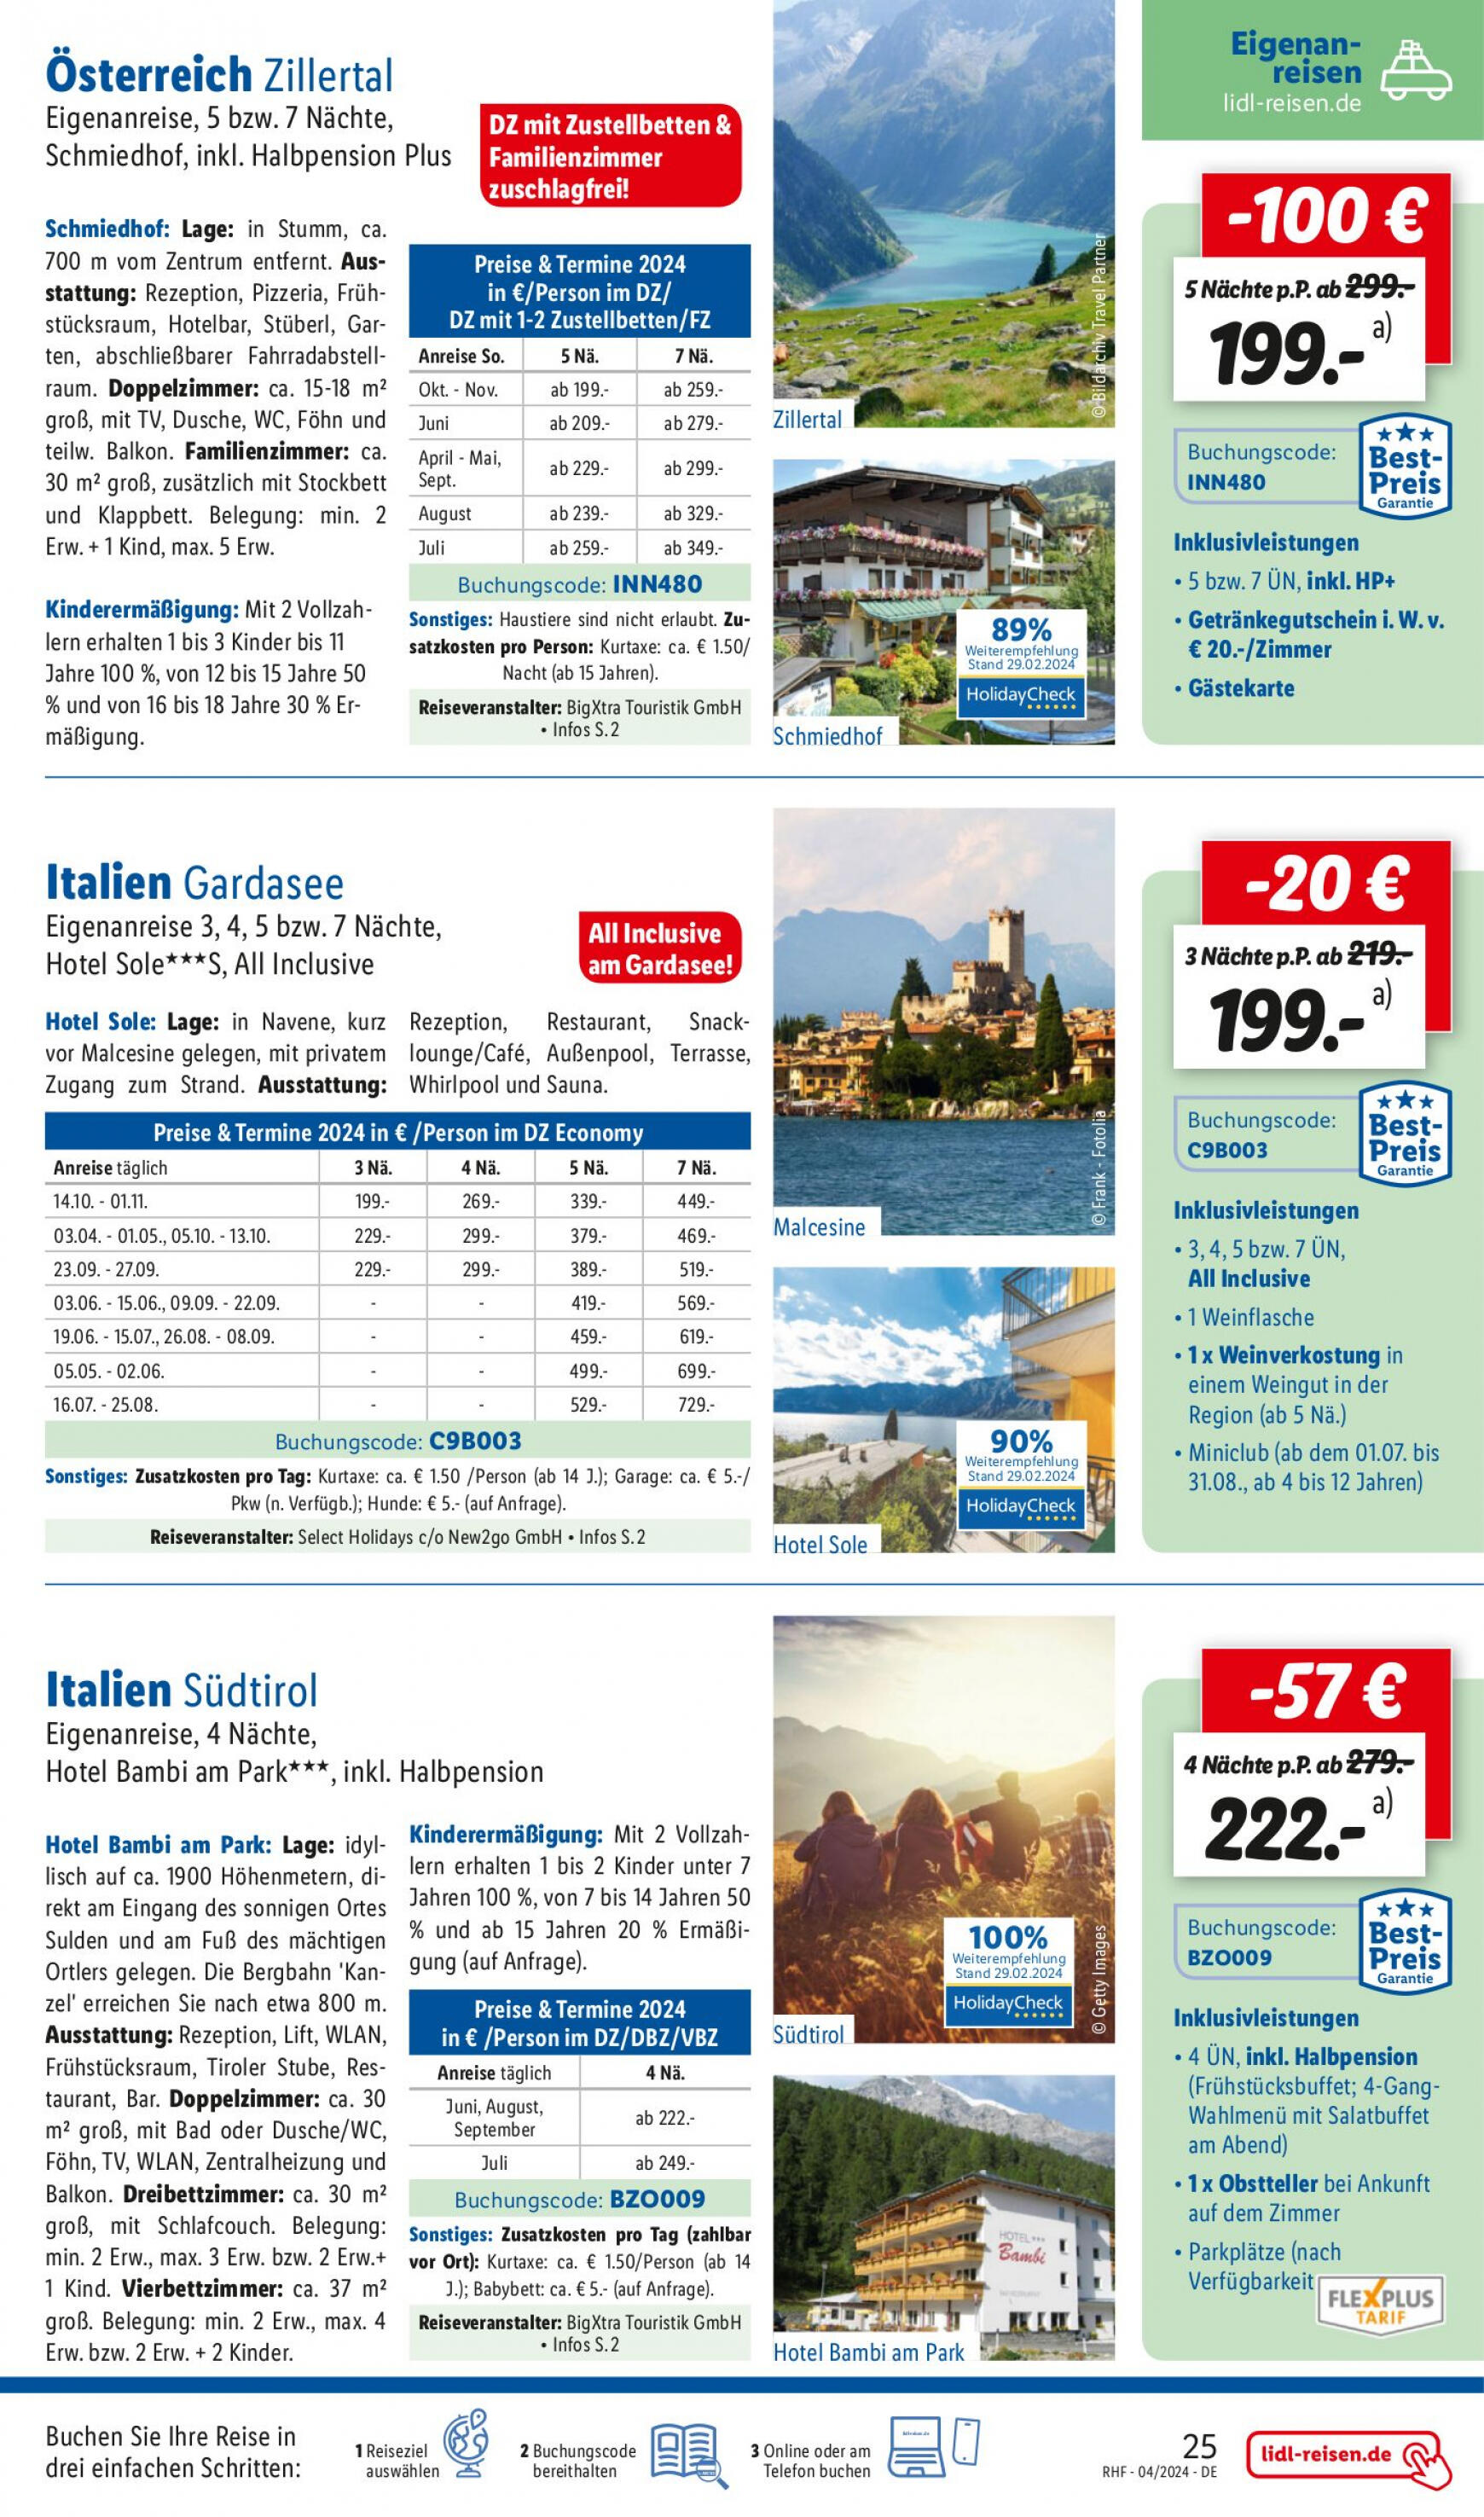 lidl - Flyer Lidl - April Reise-Highlights aktuell 27.03. - 30.04. - page: 25